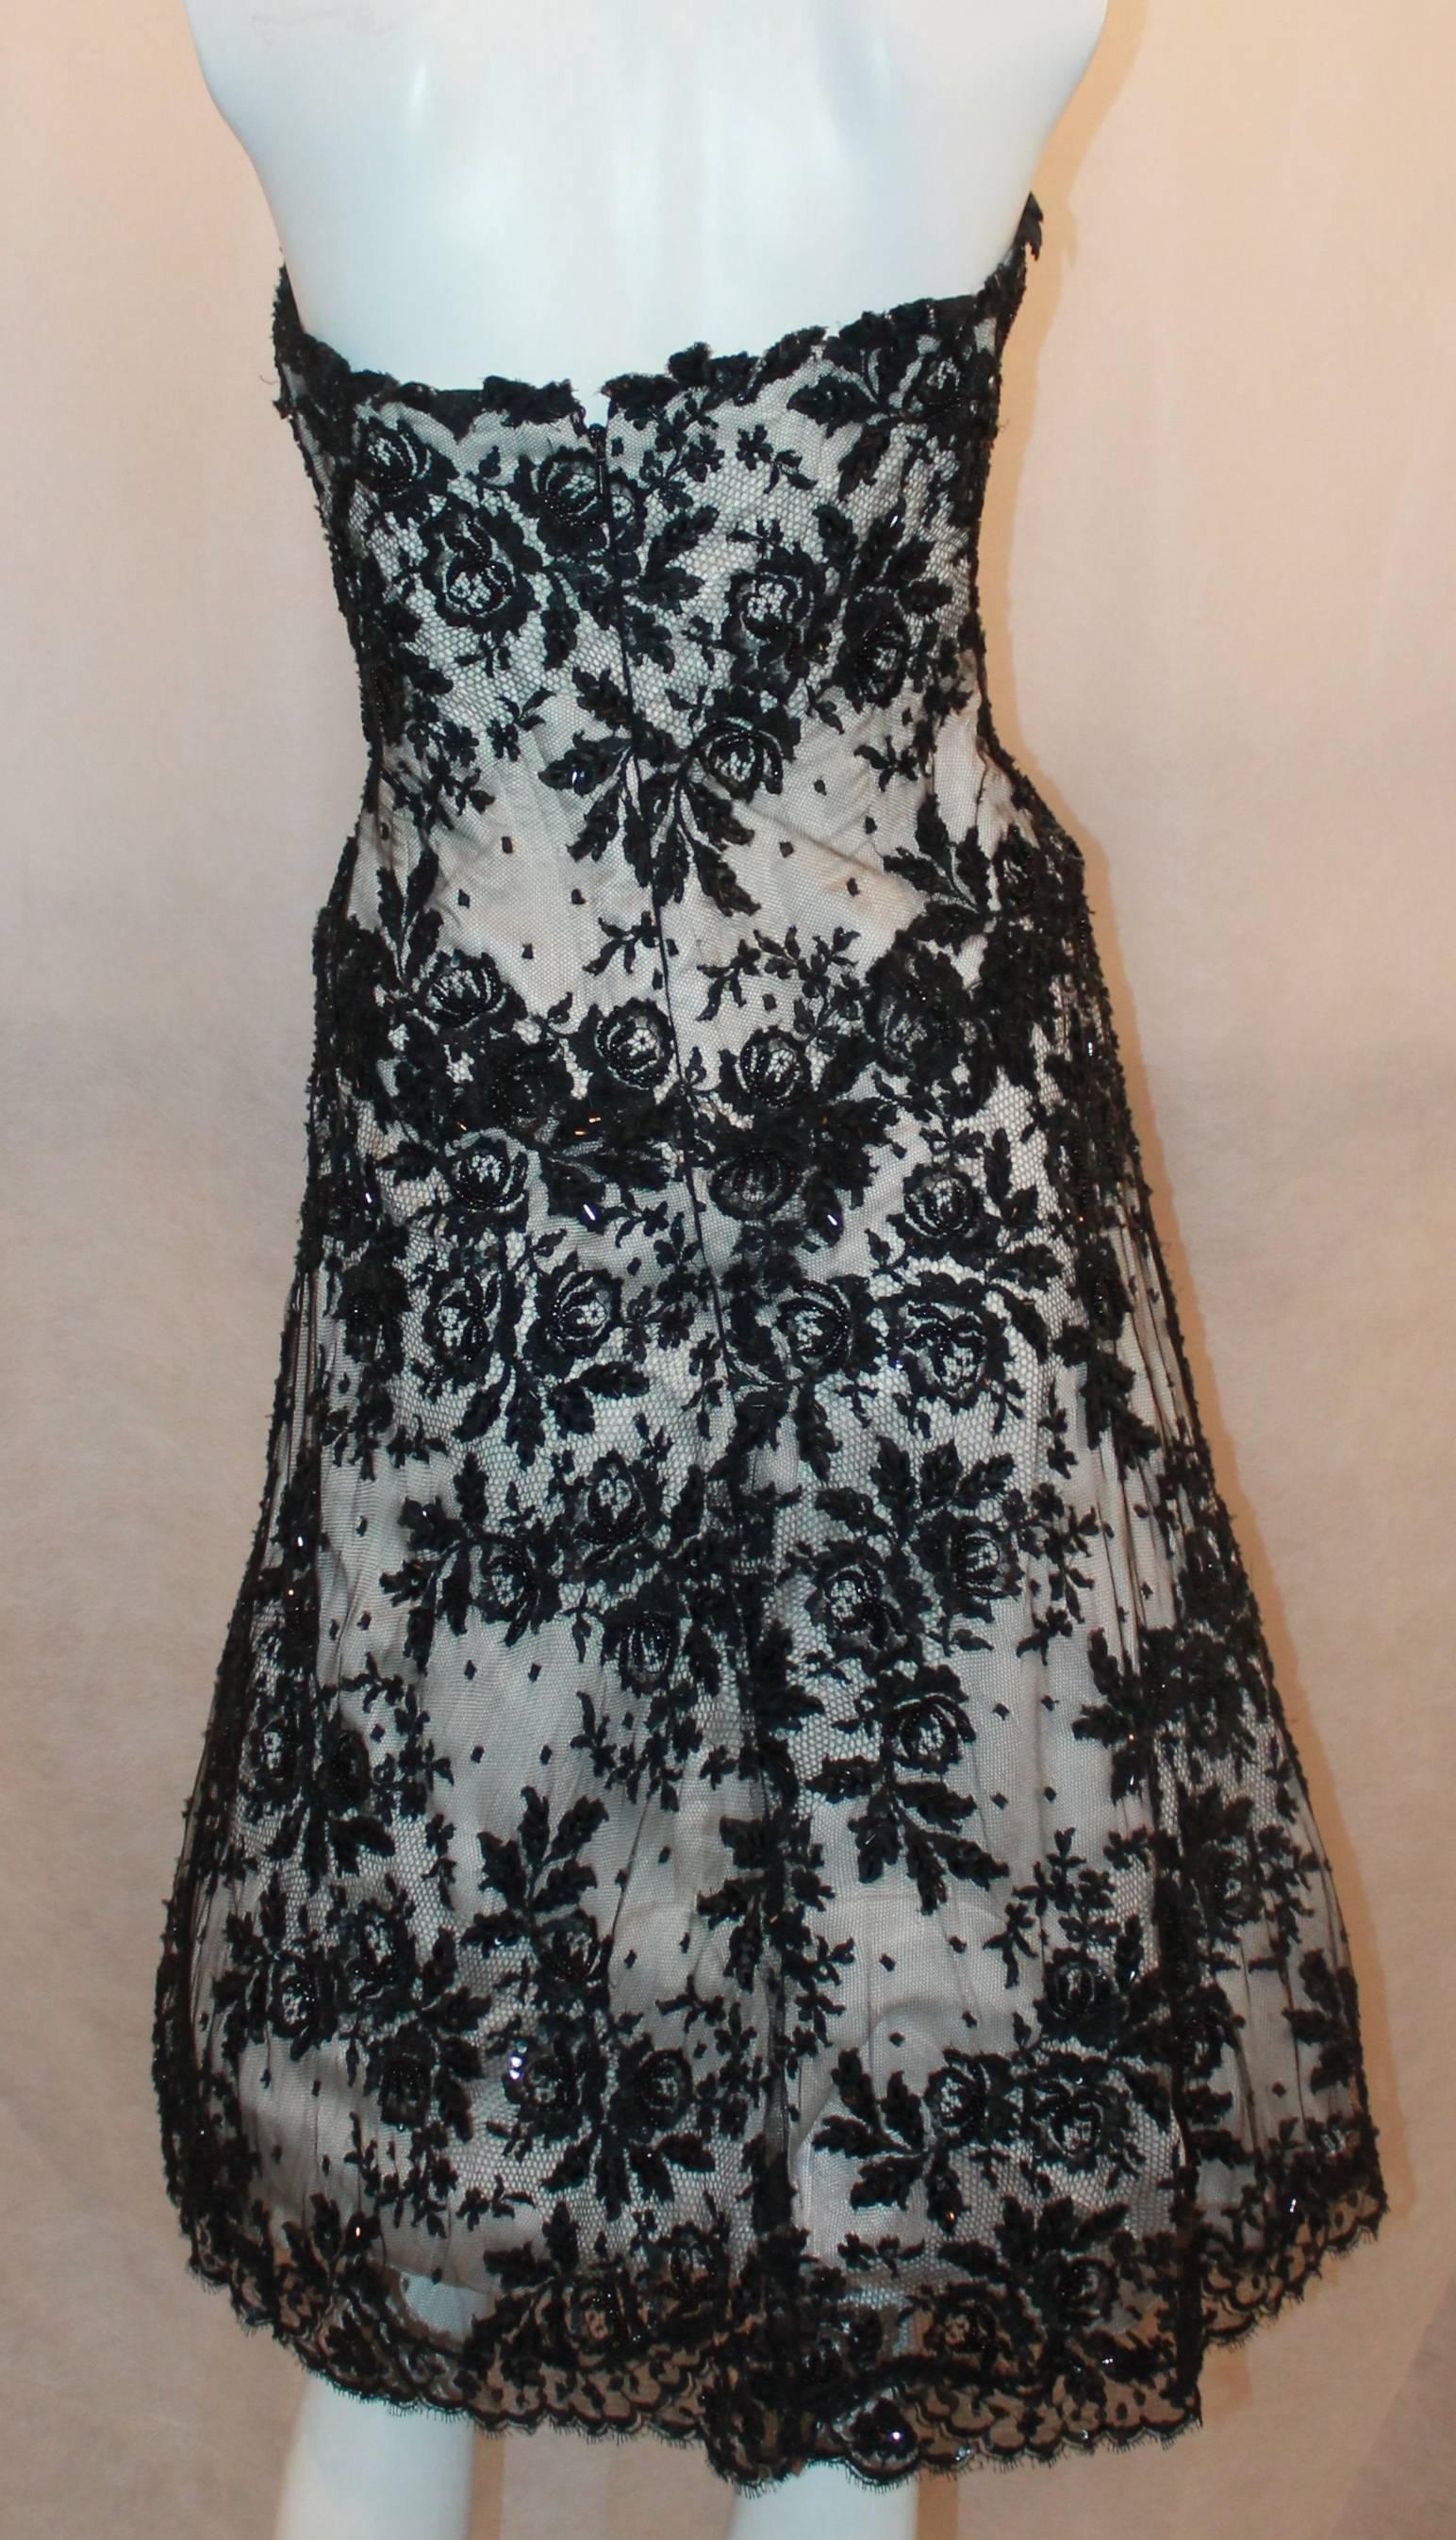 Vicky Tiel Black & White Lace Strapless Dress w/ Beading - 44 In Excellent Condition For Sale In West Palm Beach, FL